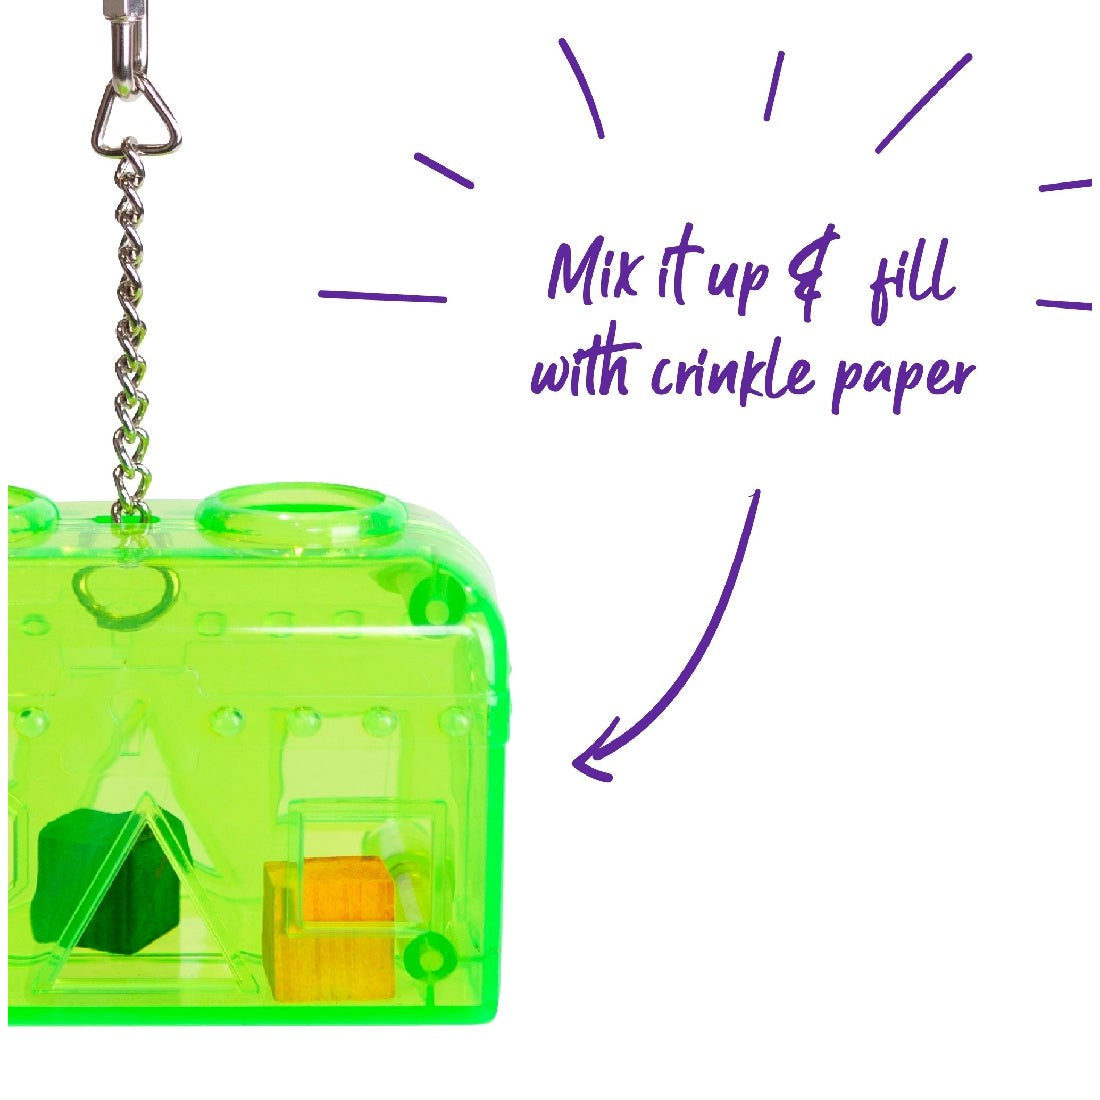 Green transparent bird toy with chain and crinkle paper suggestion.